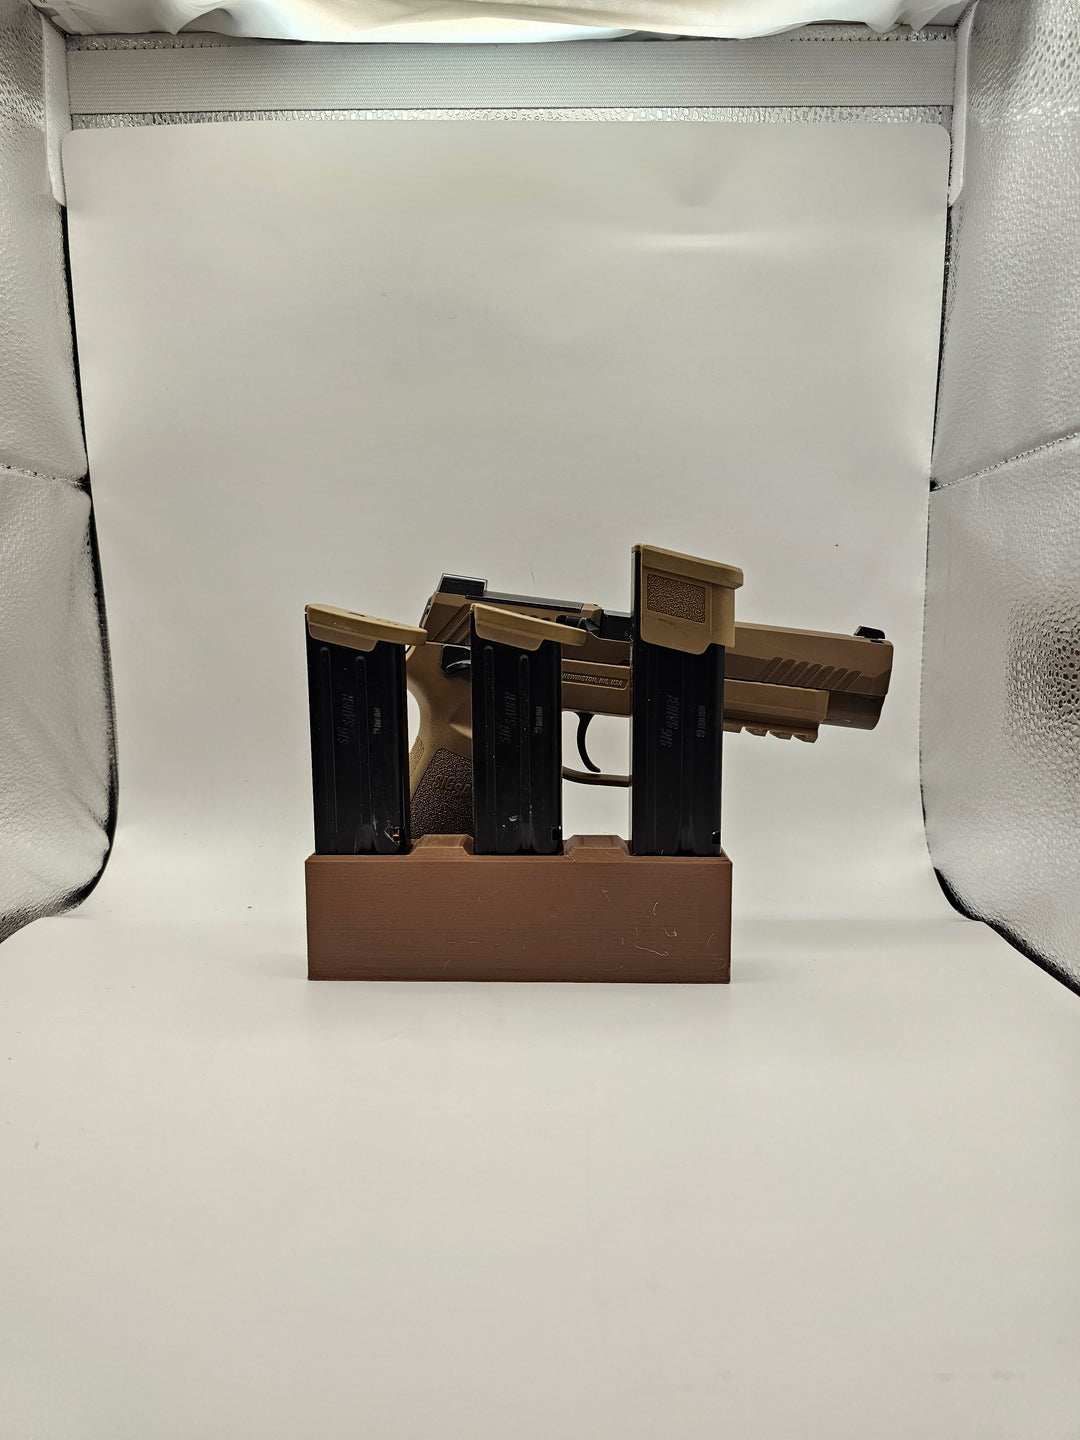 3D Printed Pistol Stand